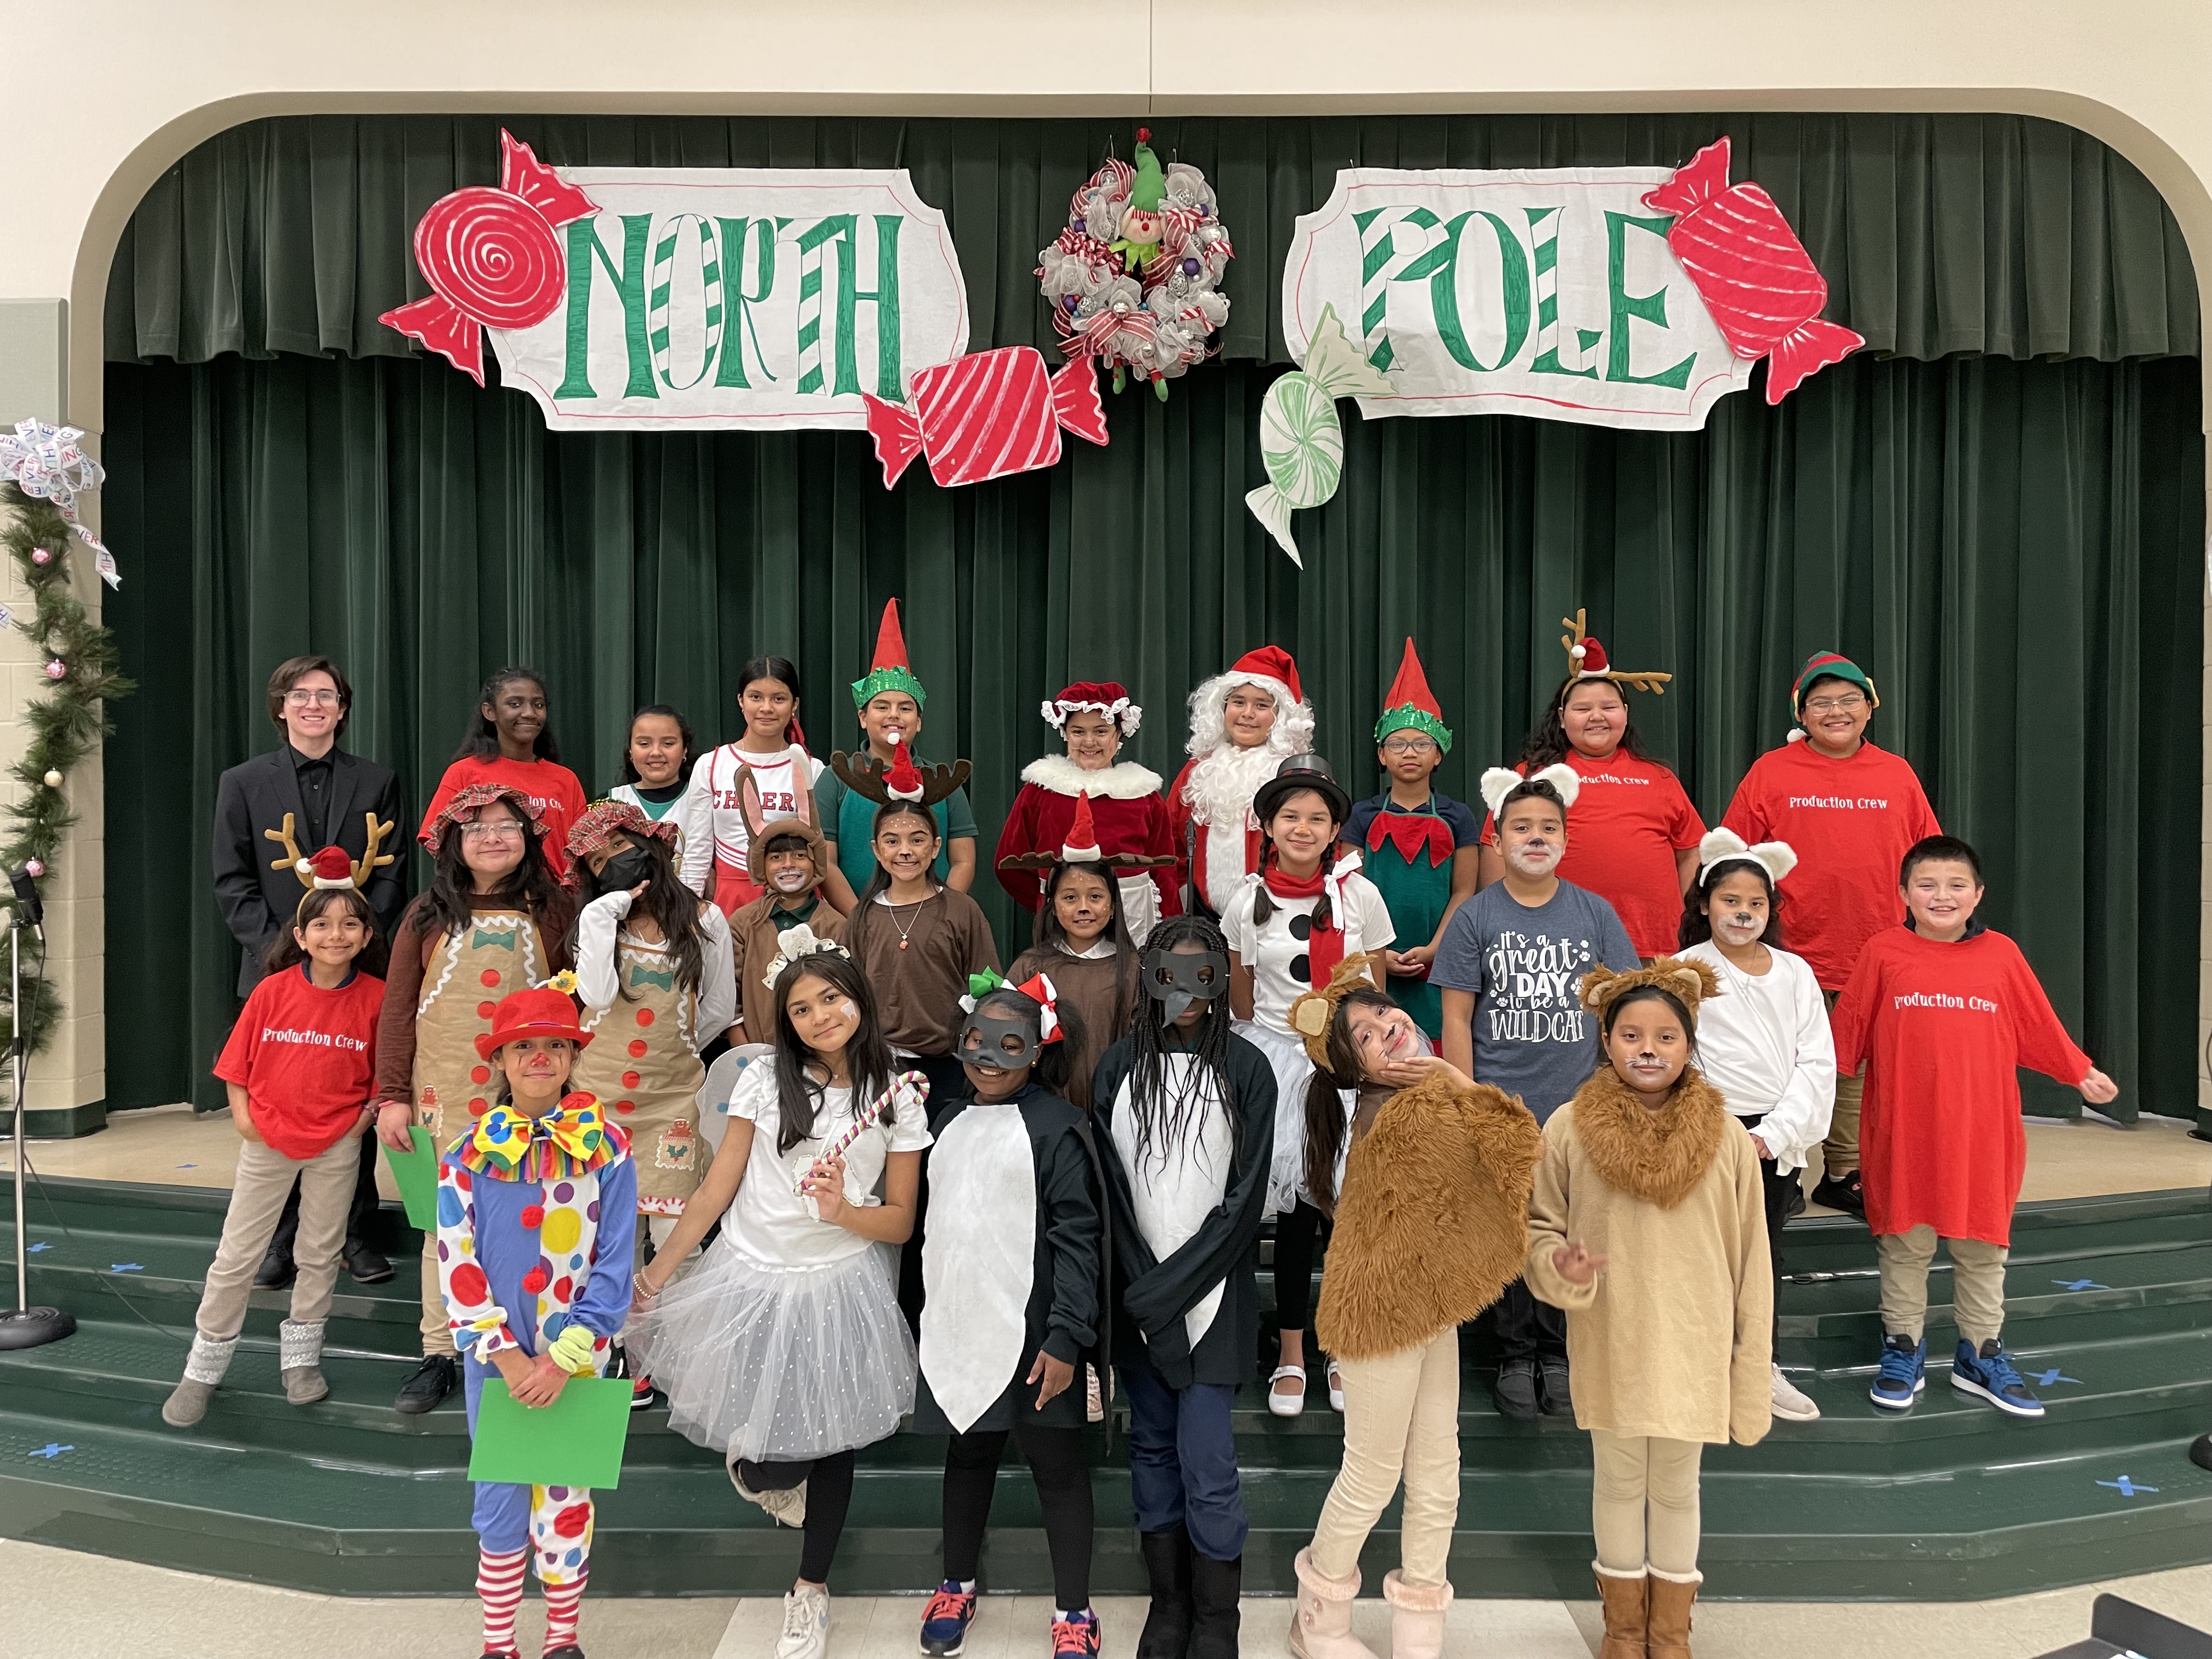 group of students on stage dressed as Christmas characters - Santa, gingerbread men, elves